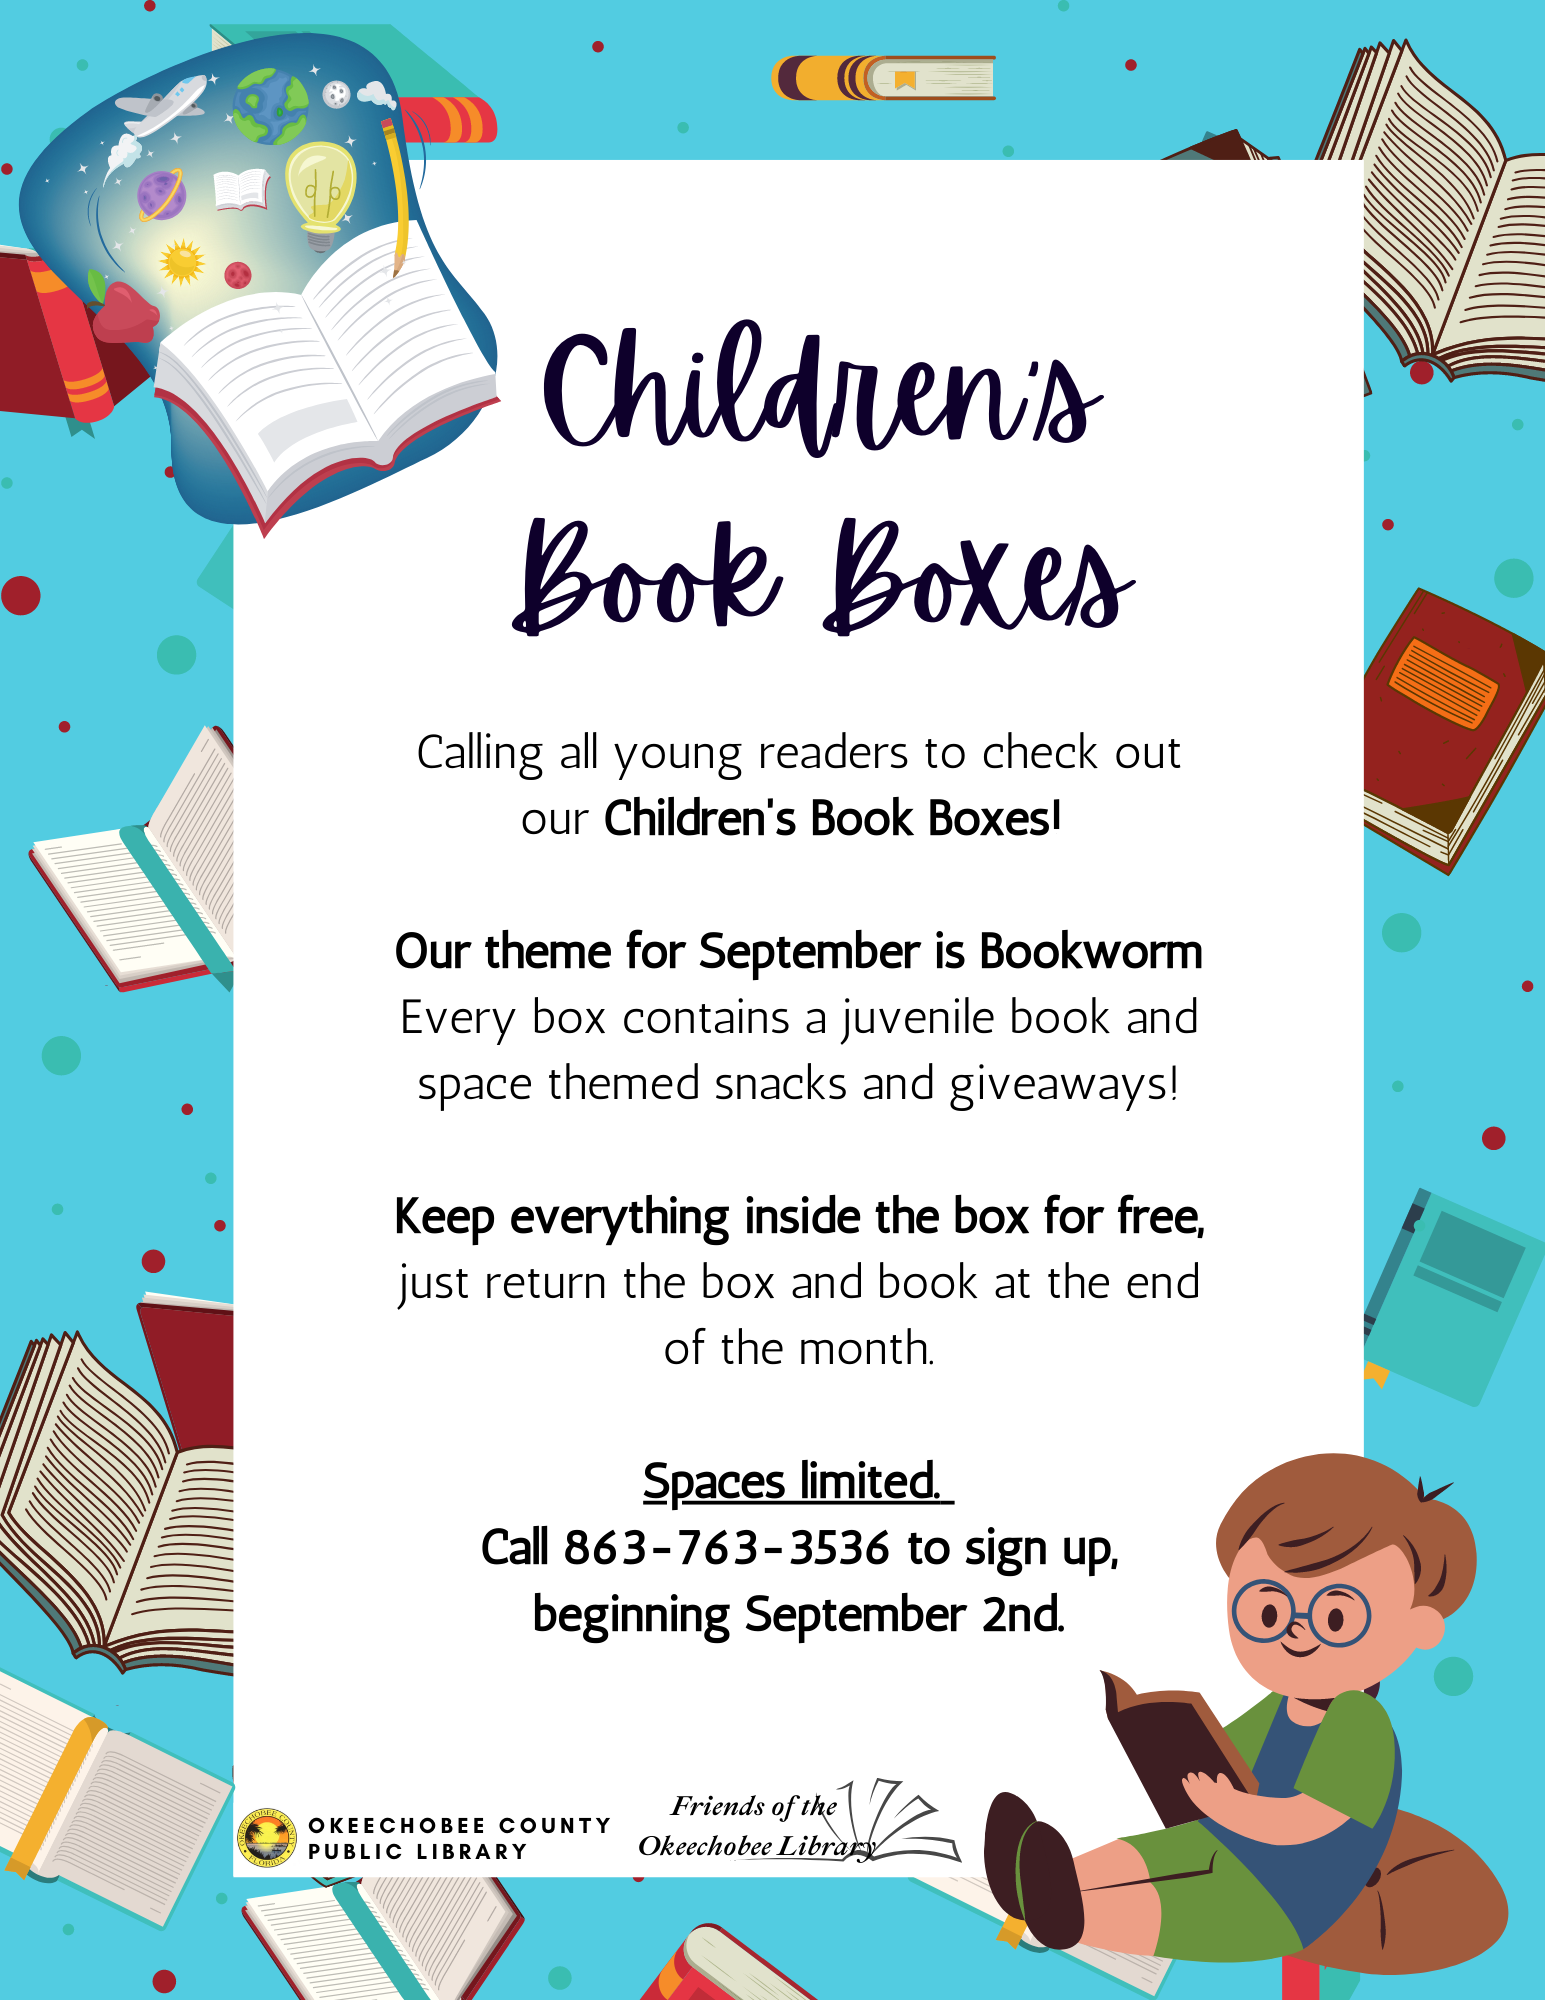 September Children's Book Boxes! Every box contains a juvenile book and reading themed snacks and giveaways!